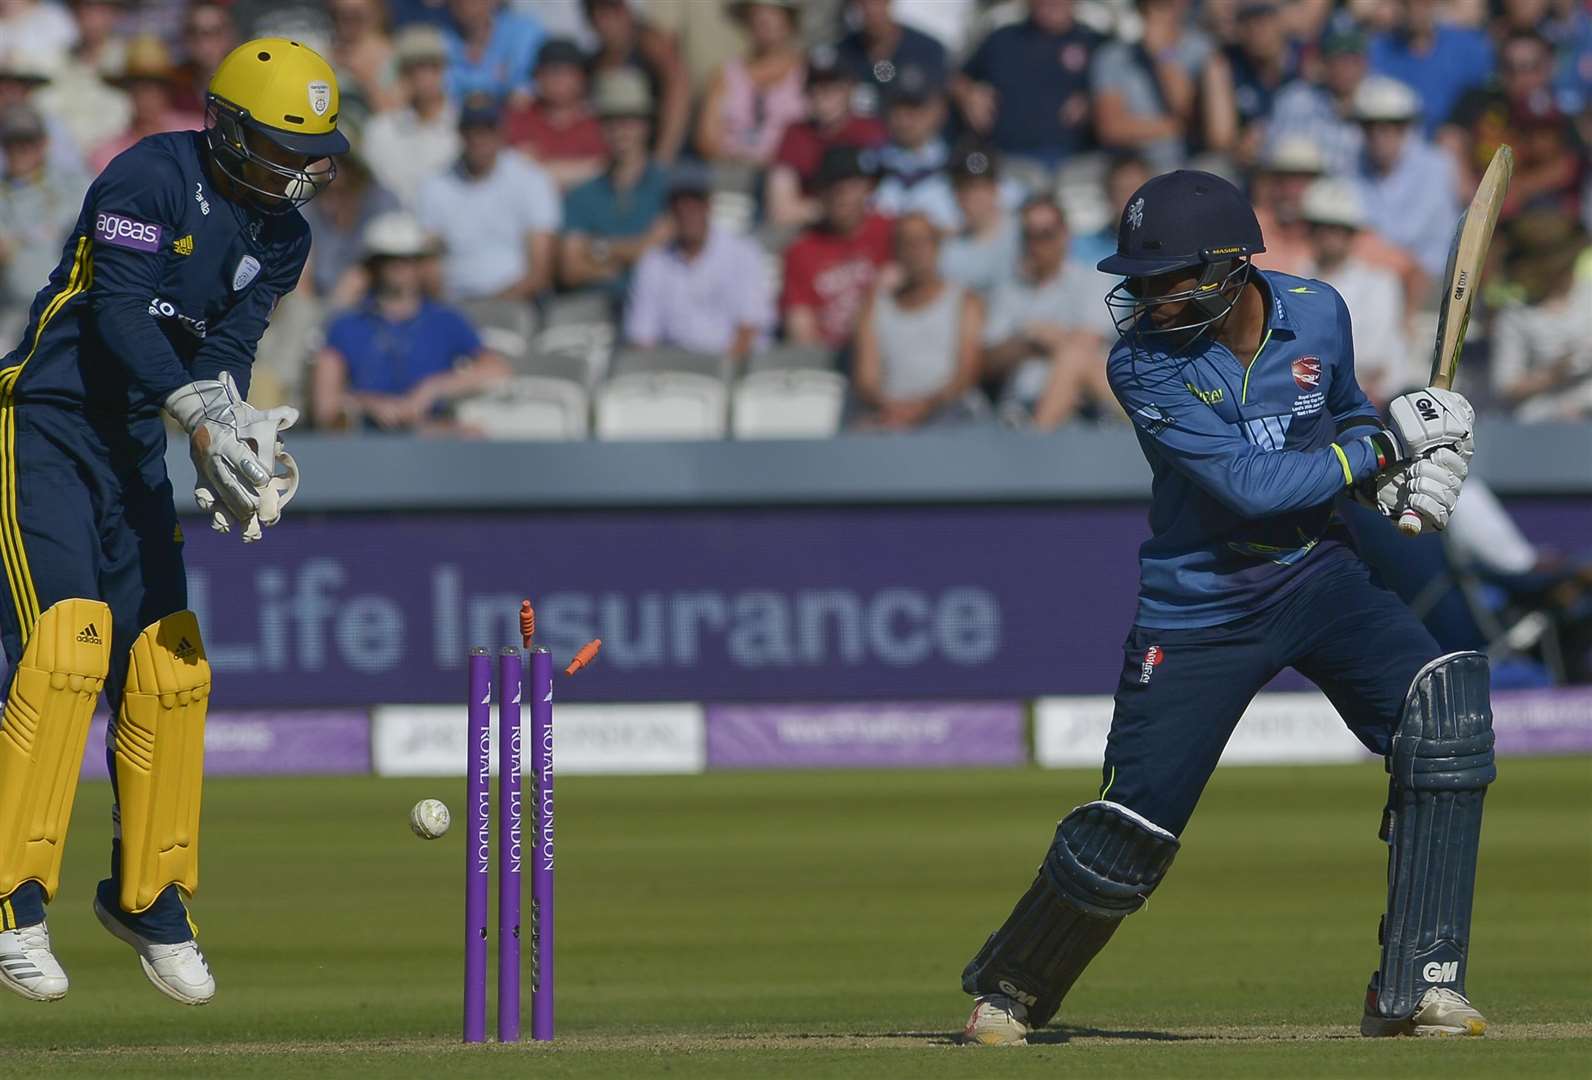 Daniel Bell-Drummond chops the ball onto his own stumps Picture: Ady Kerry